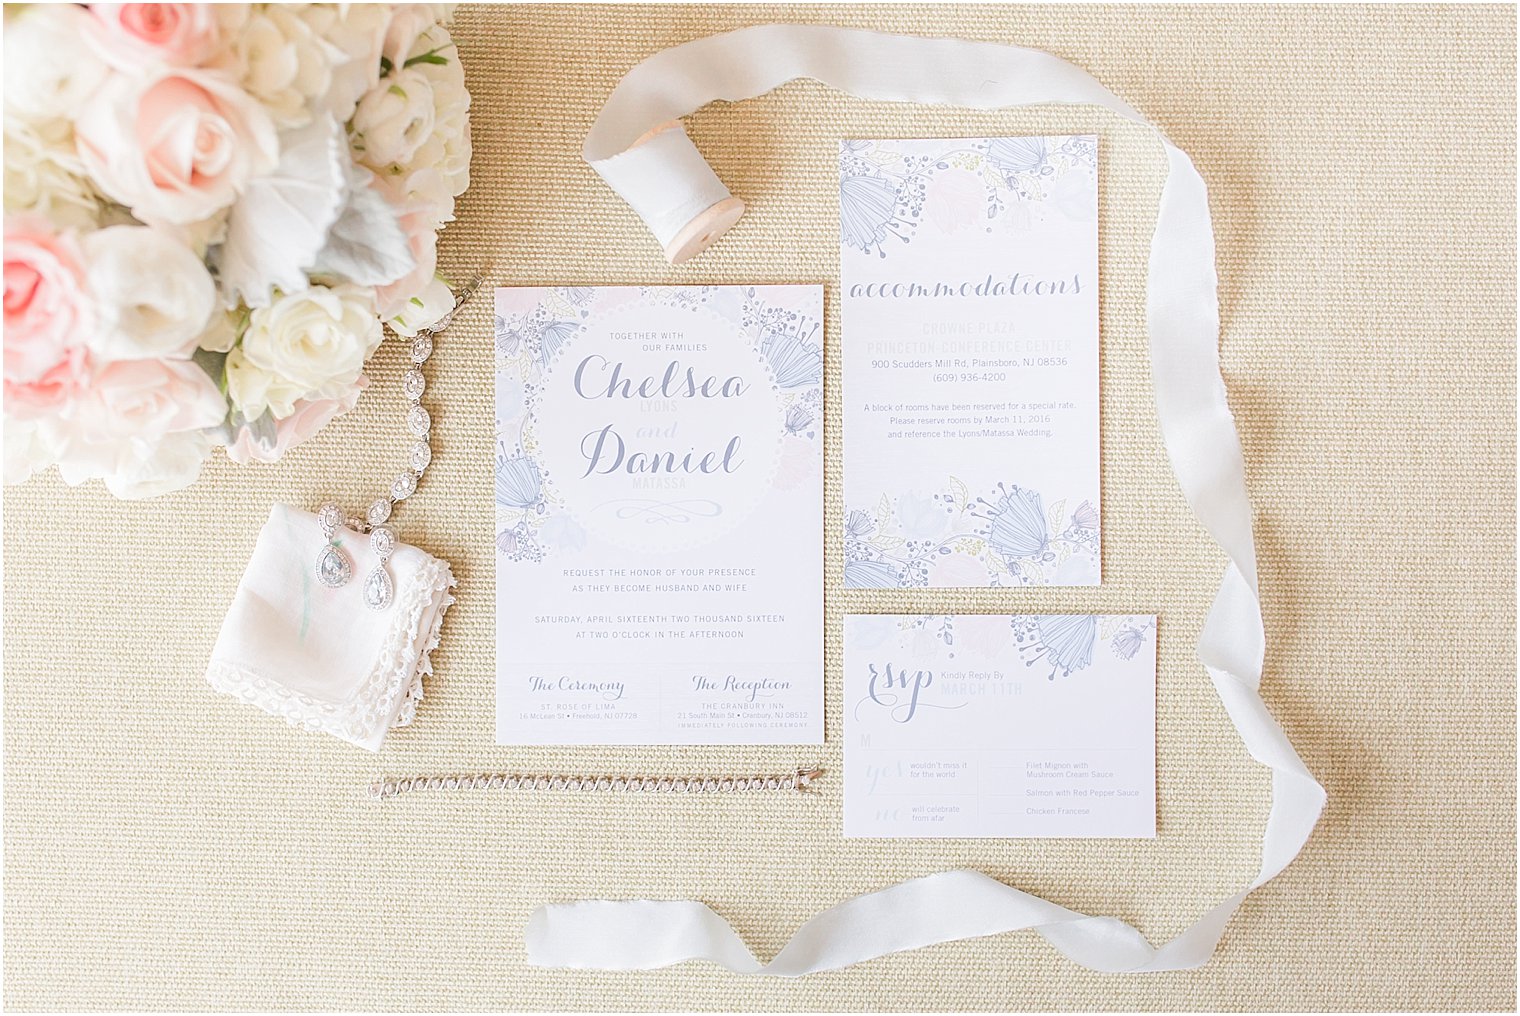 Florals by Monday Morning Flower & Balloon Co. | Invitations by Honeybliss Design